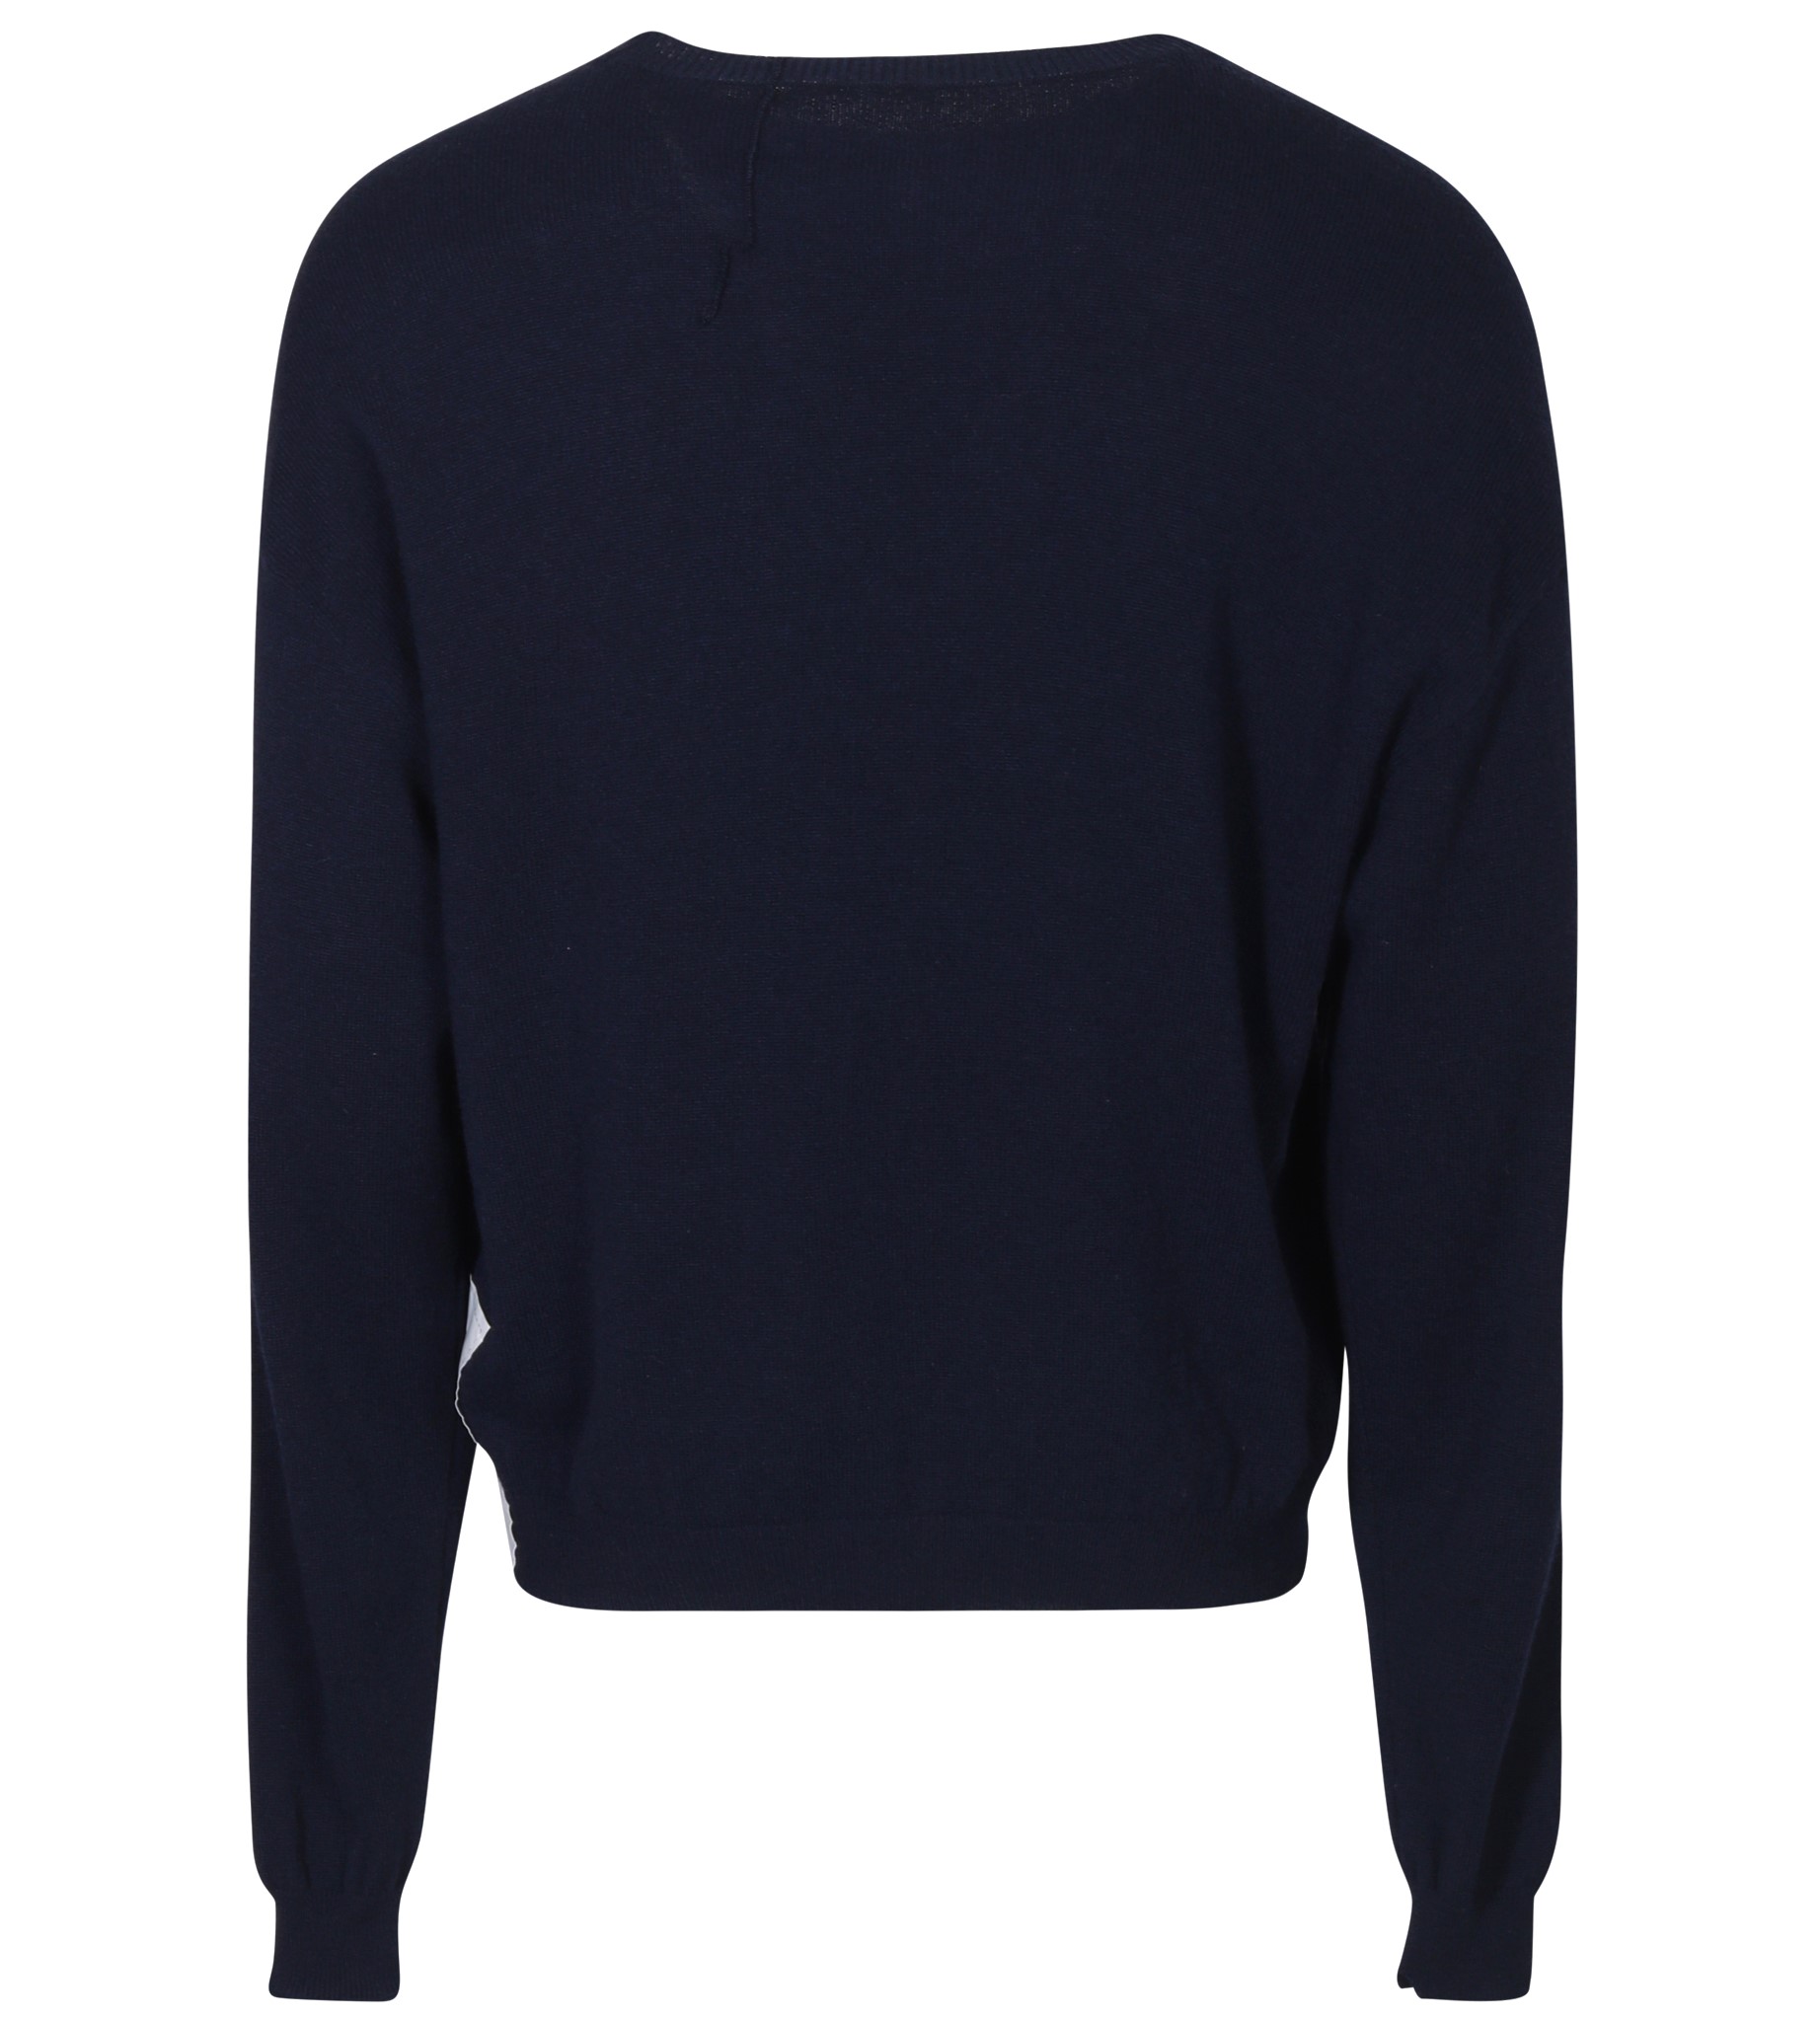 RAMAEL Infinity Cashmere Sweater in Navy L